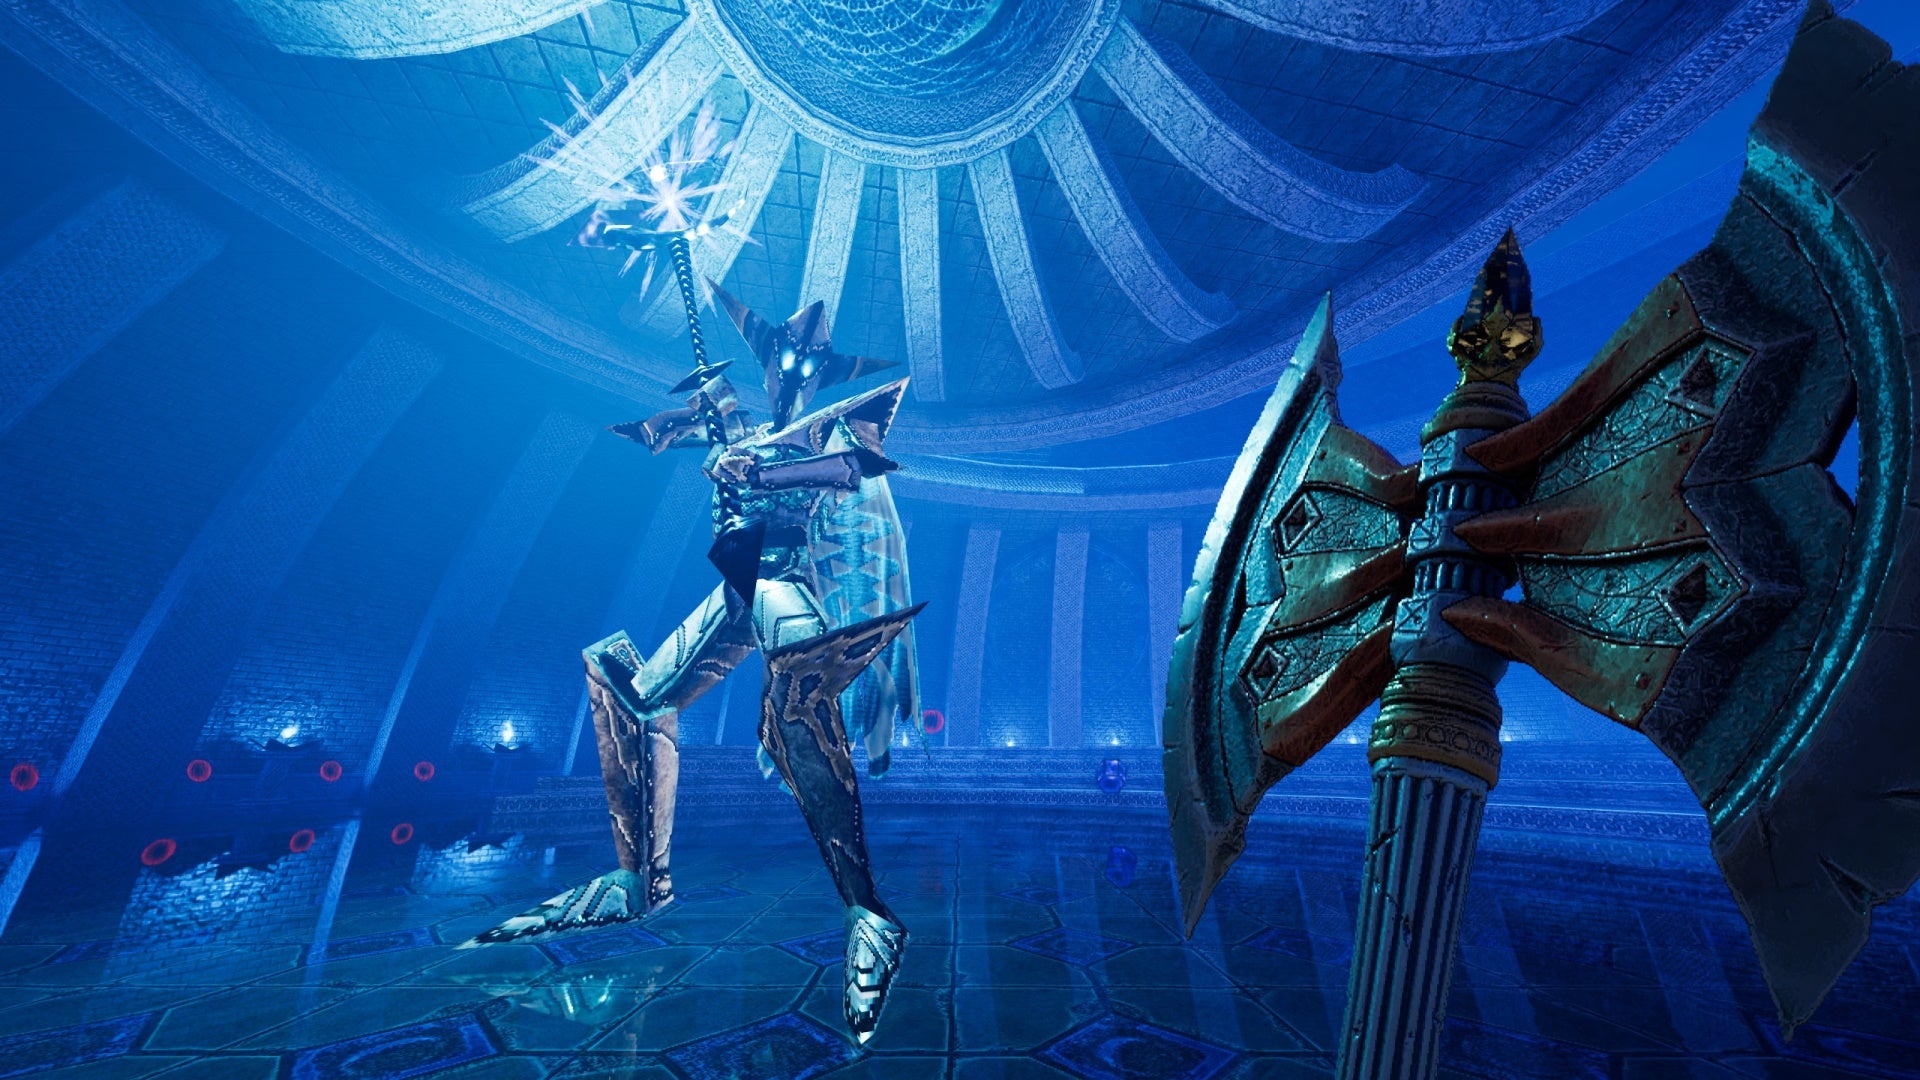 An image from Amid Evil which shows the player wielding a battle axe and stood toe-to-toe with a giant armoured enemy holding a staff.